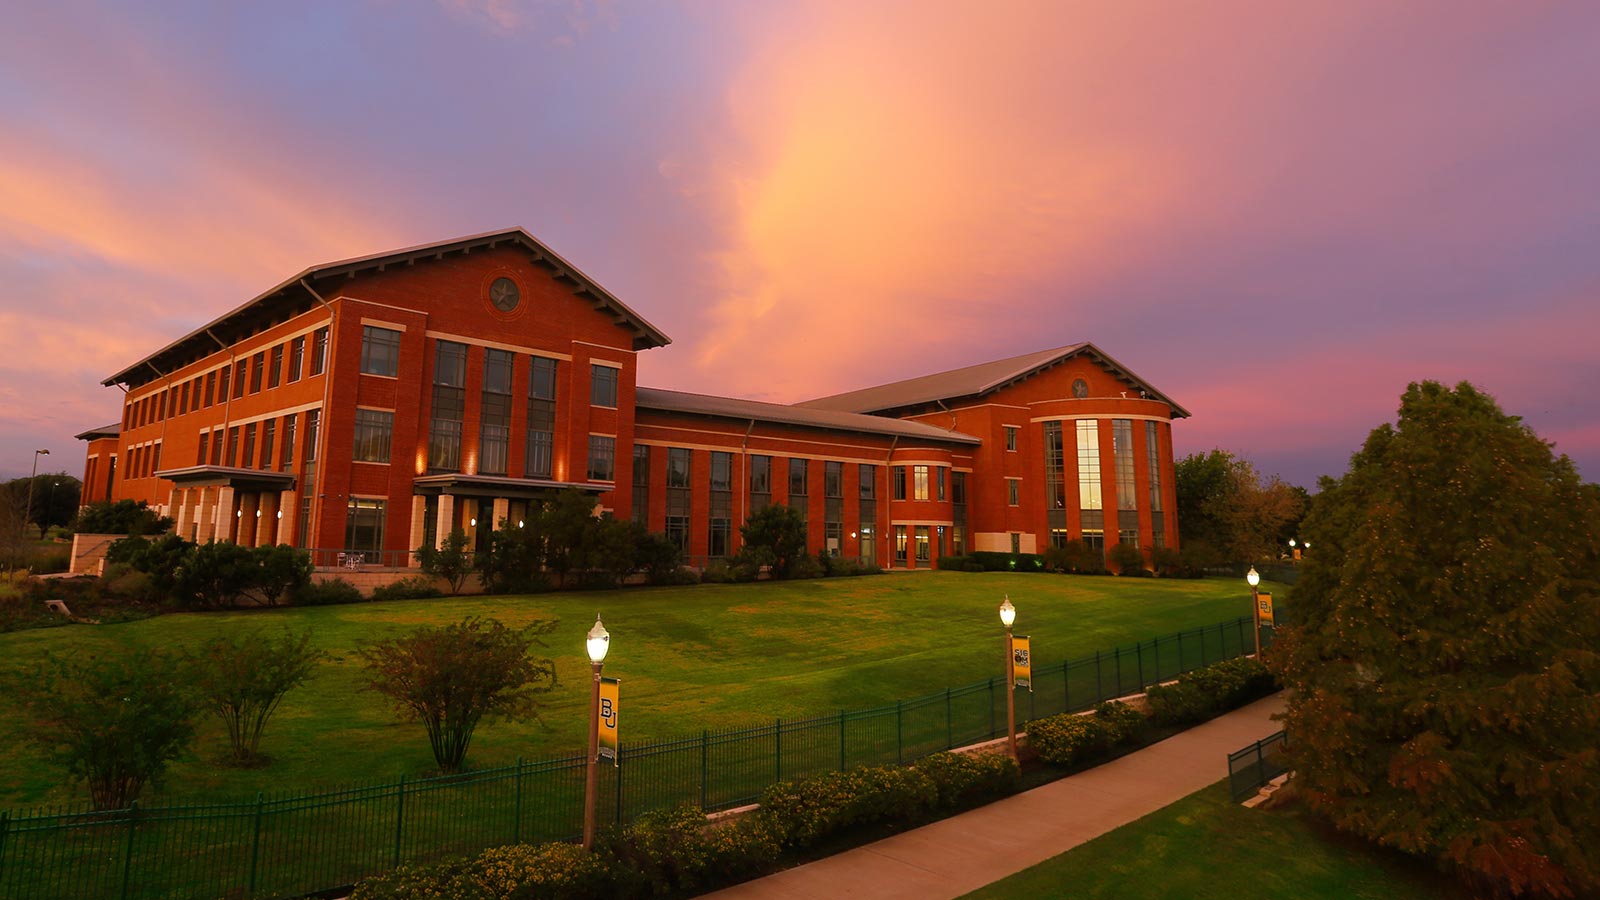 Established in 1857, the Baylor Law School moved into the beautiful Sheila & Walter Umphrey Law Center in 2001.  The facility is situated on the banks of the Brazos River.